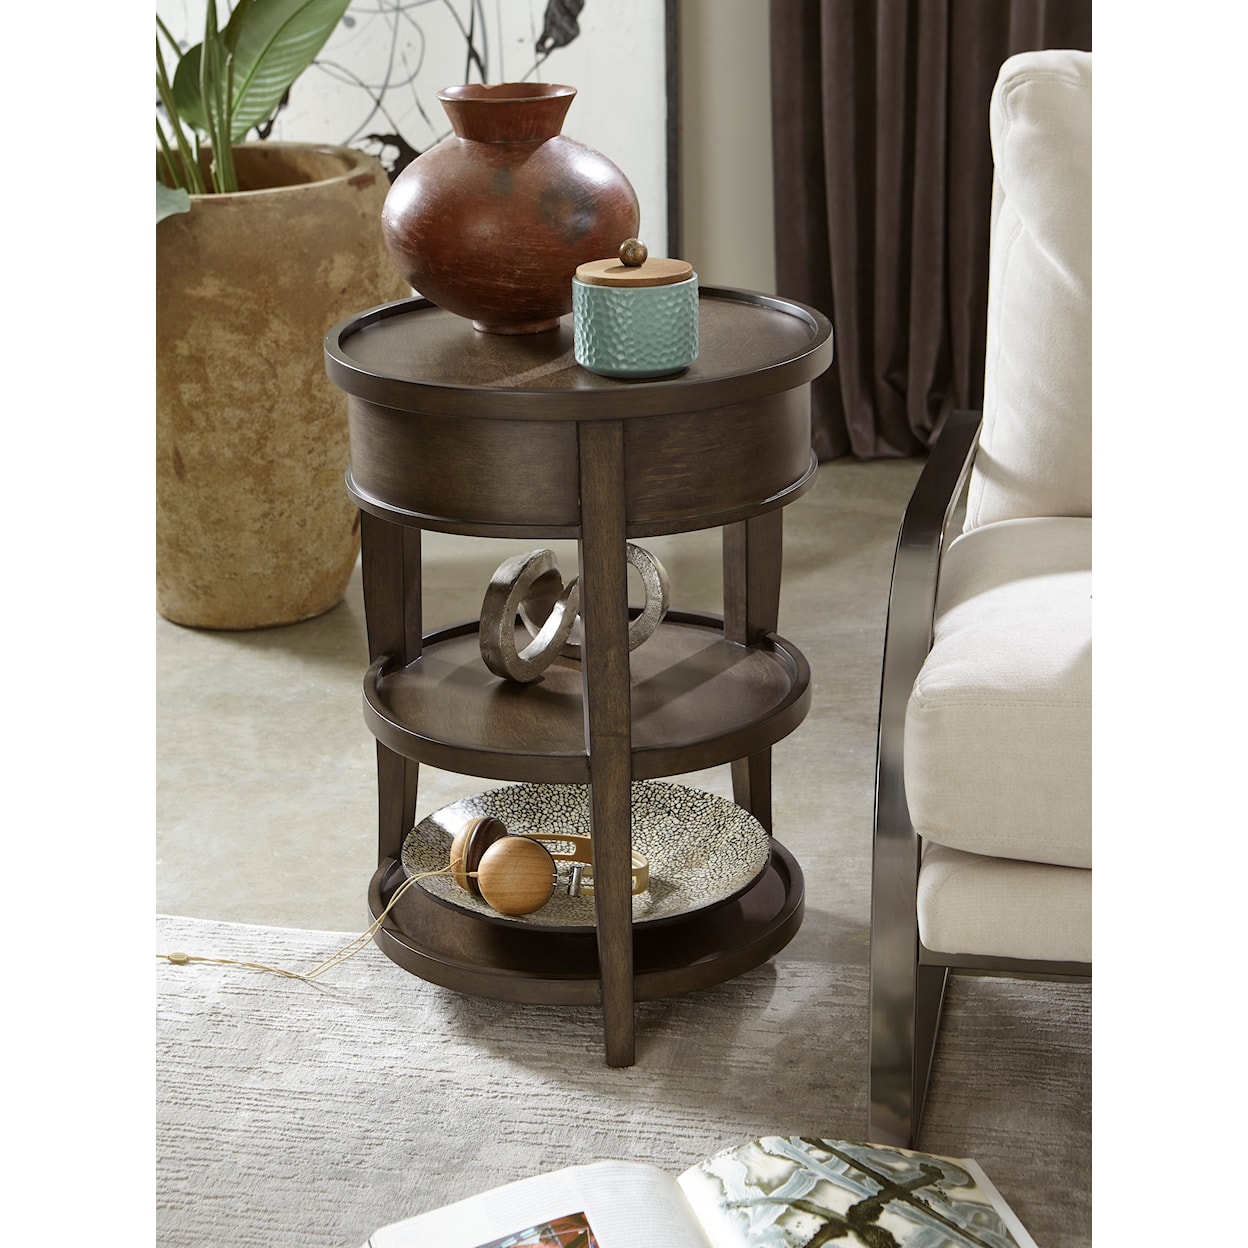 Aspenhome Blakely Round Chairside Table